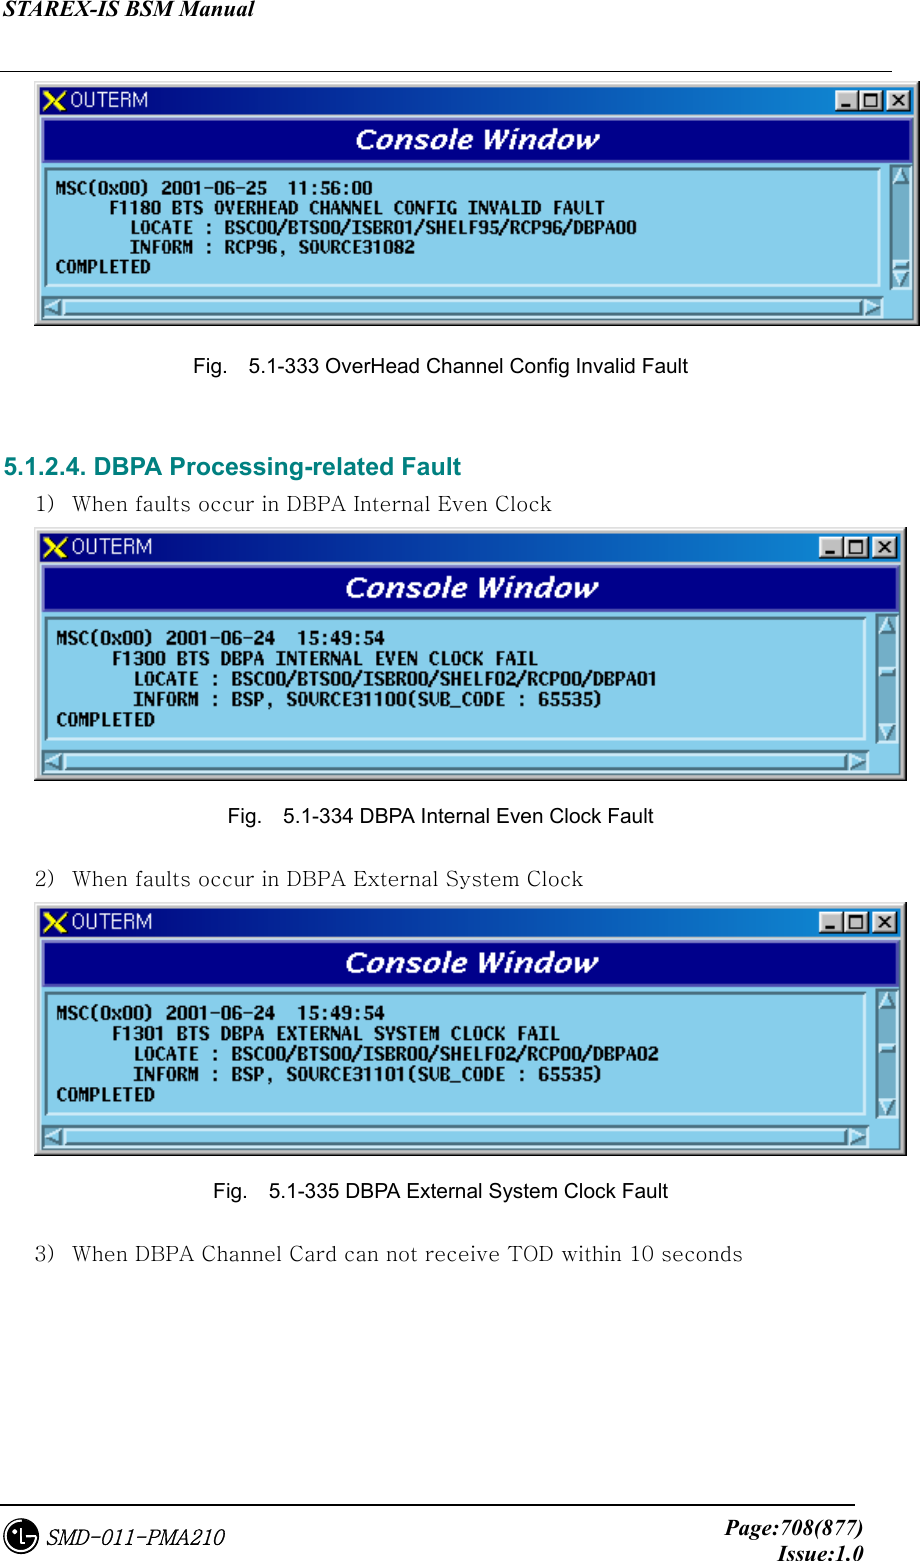 STAREX-IS BSM Manual     Page:708(877)Issue:1.0SMD-011-PMA210  Fig.    5.1-333 OverHead Channel Config Invalid Fault  5.1.2.4. DBPA Processing-related Fault 1)  When faults occur in DBPA Internal Even Clock  Fig.    5.1-334 DBPA Internal Even Clock Fault 2)  When faults occur in DBPA External System Clock  Fig.    5.1-335 DBPA External System Clock Fault 3)  When DBPA Channel Card can not receive TOD within 10 seconds 